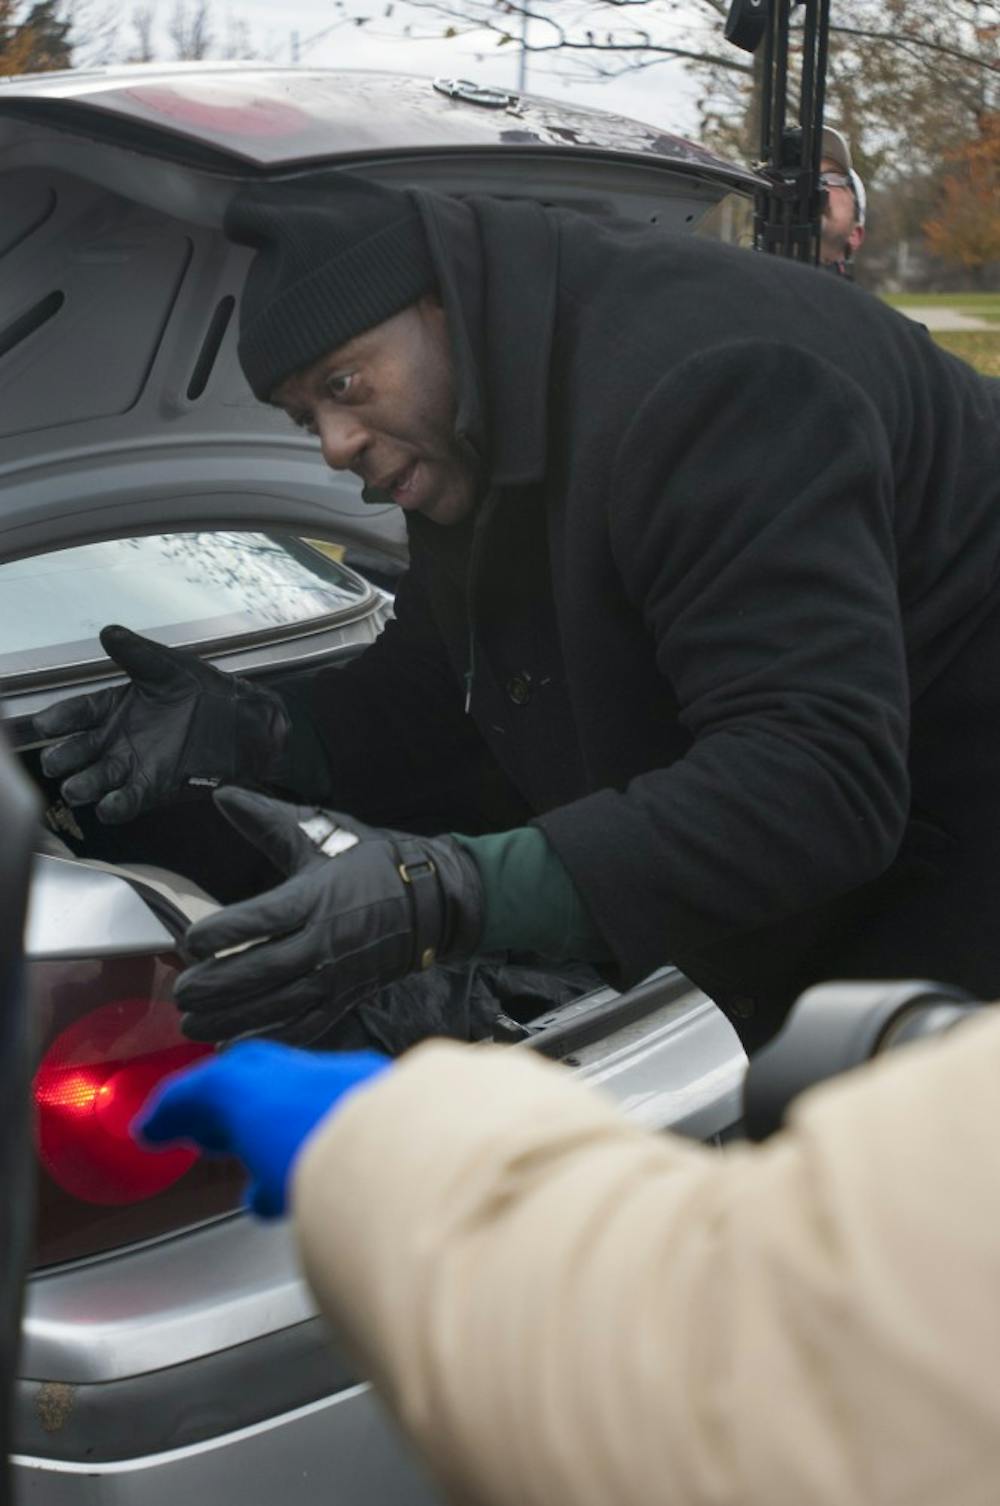 Earvin "Magic" Johnson Jr. loads supplies into the back of a car on Nov. 20, 2016 at Everett High School in Lansing. Johnson was there for Holiday Hope Lansing which gives supplies to families in need.